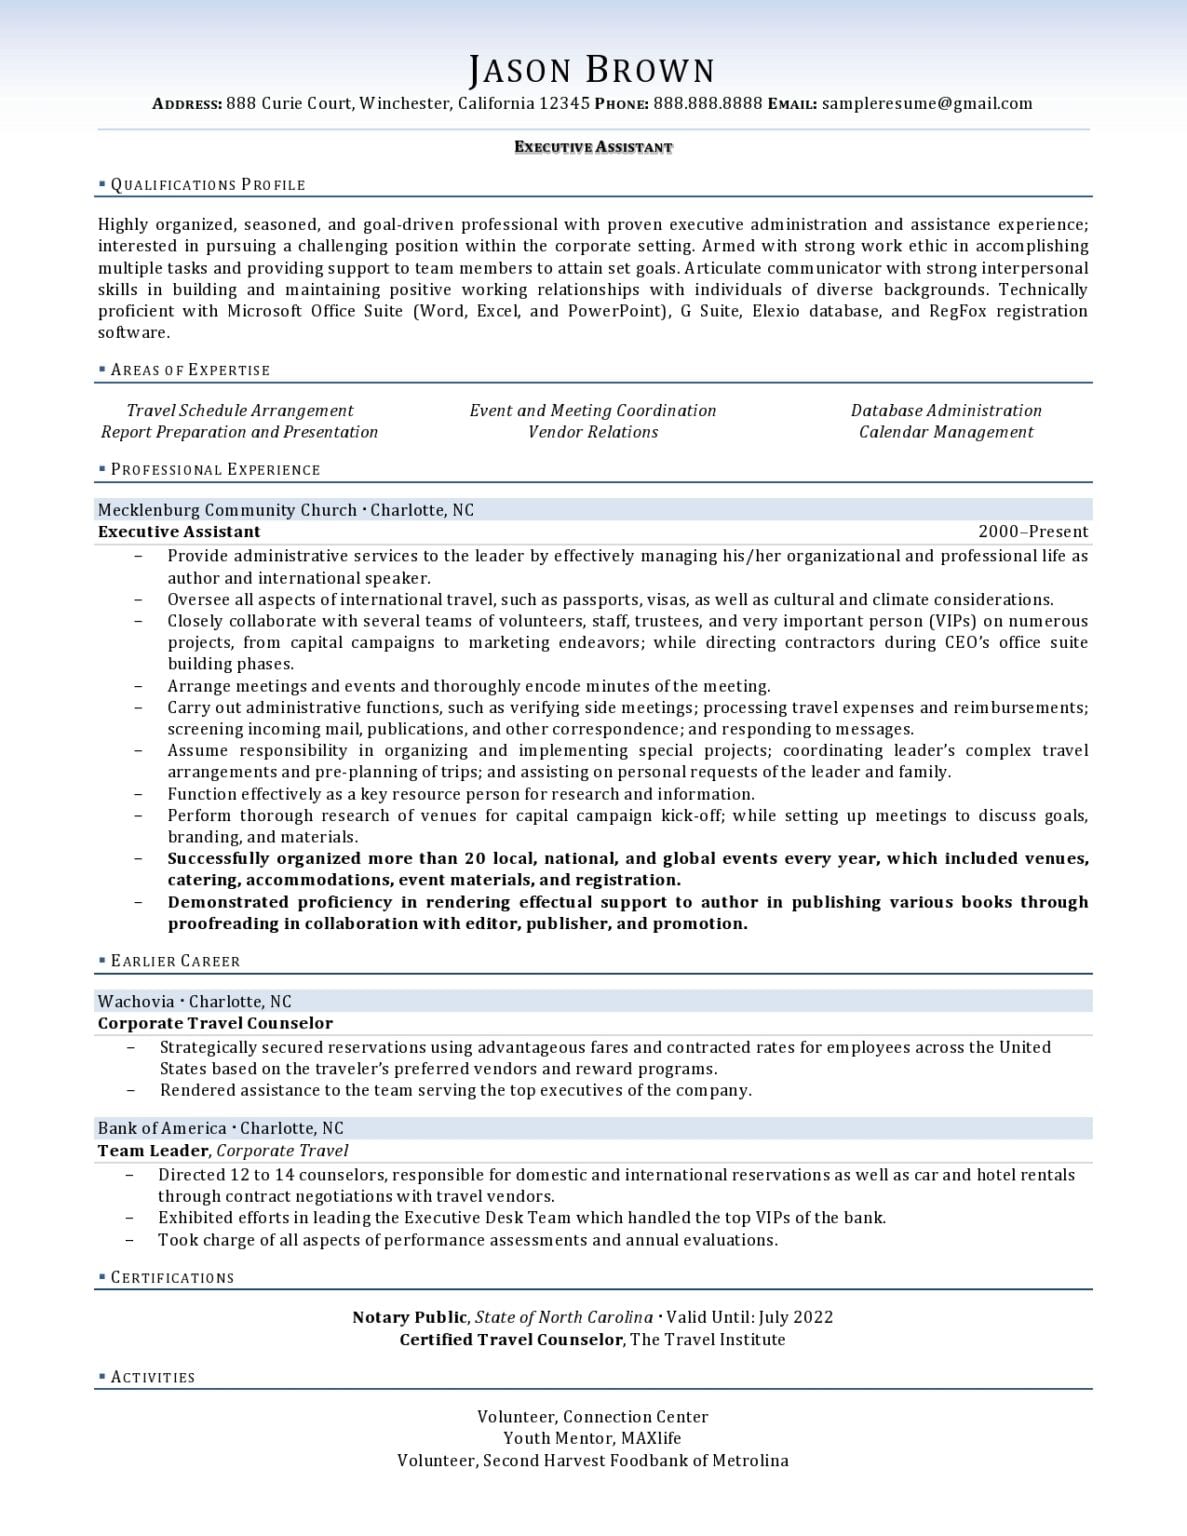 Executive Assistant Resume Example Resume Professional Writers